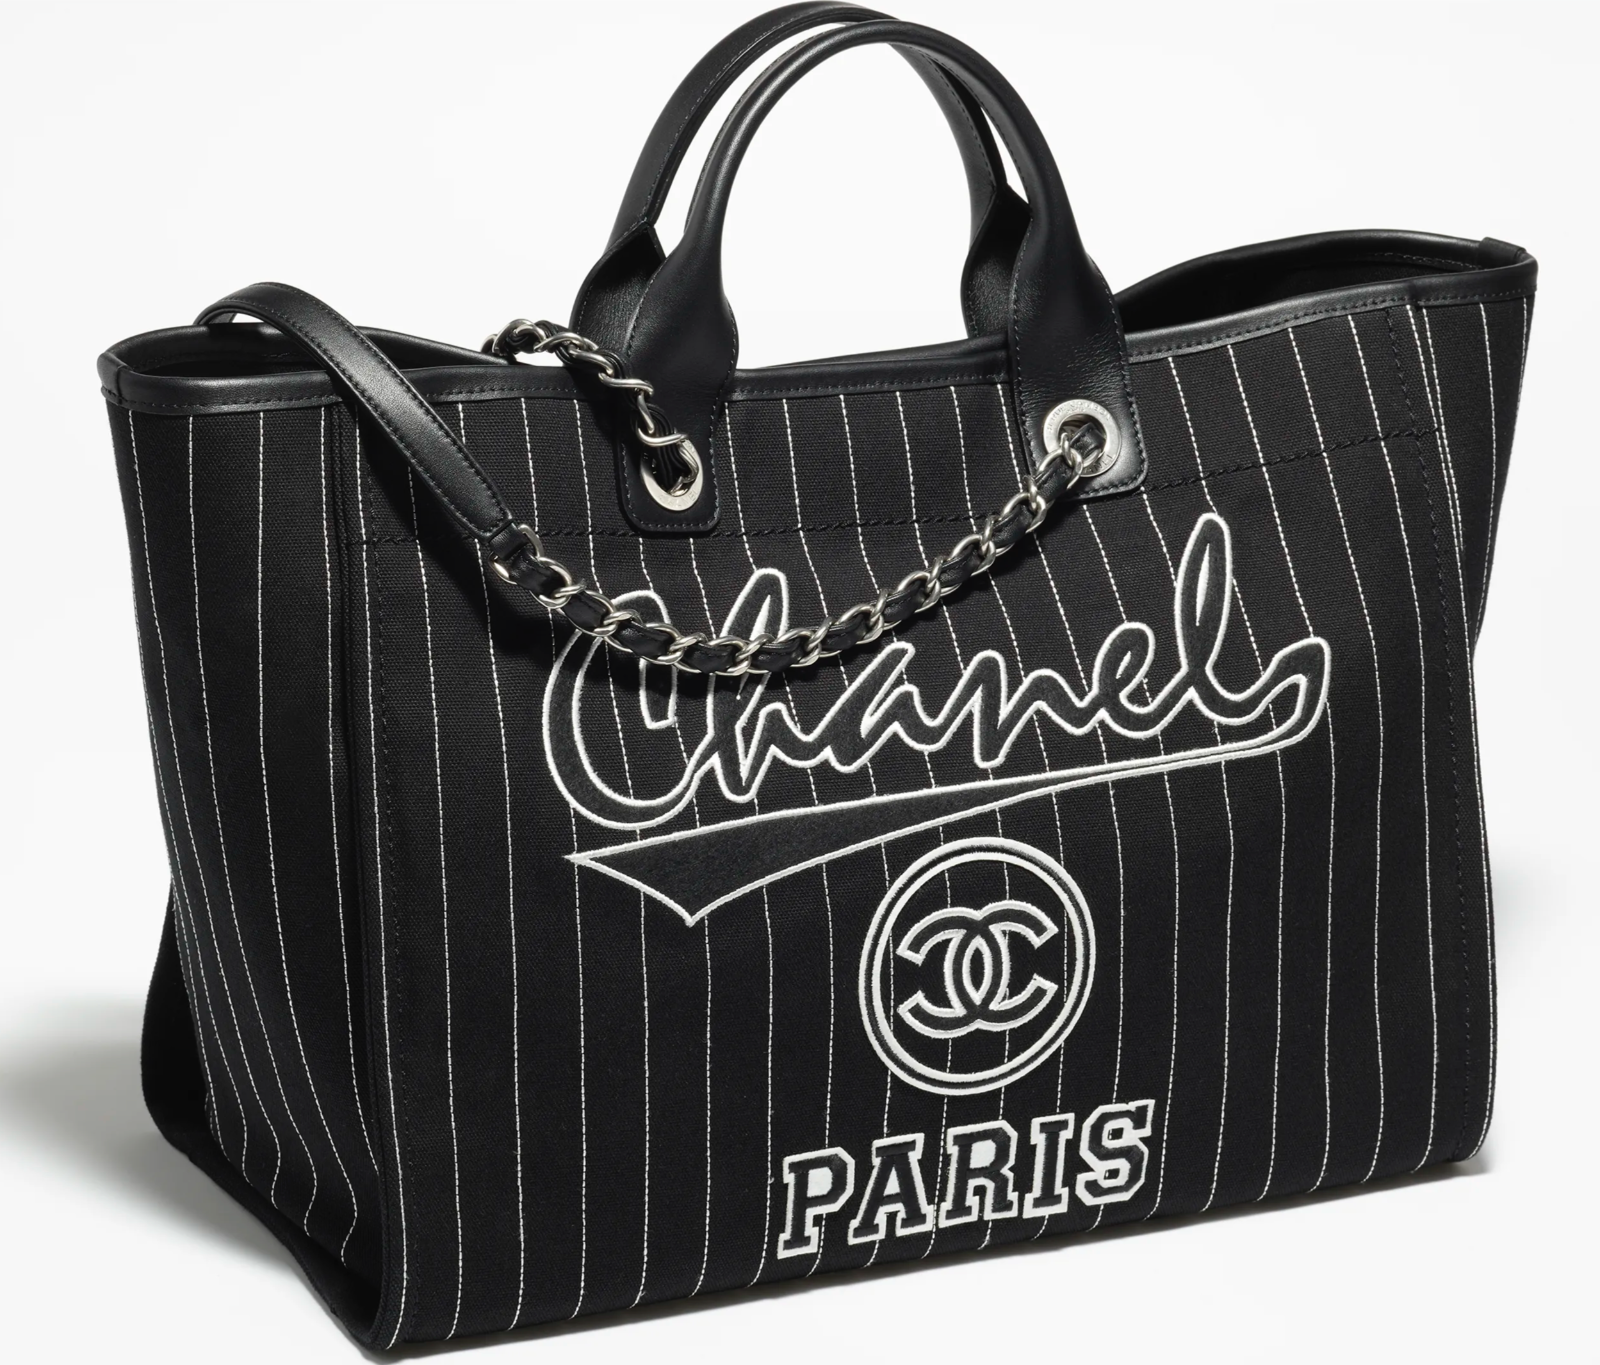 CHANEL Canvas Exterior Striped Bags & Handbags for Women, Authenticity  Guaranteed